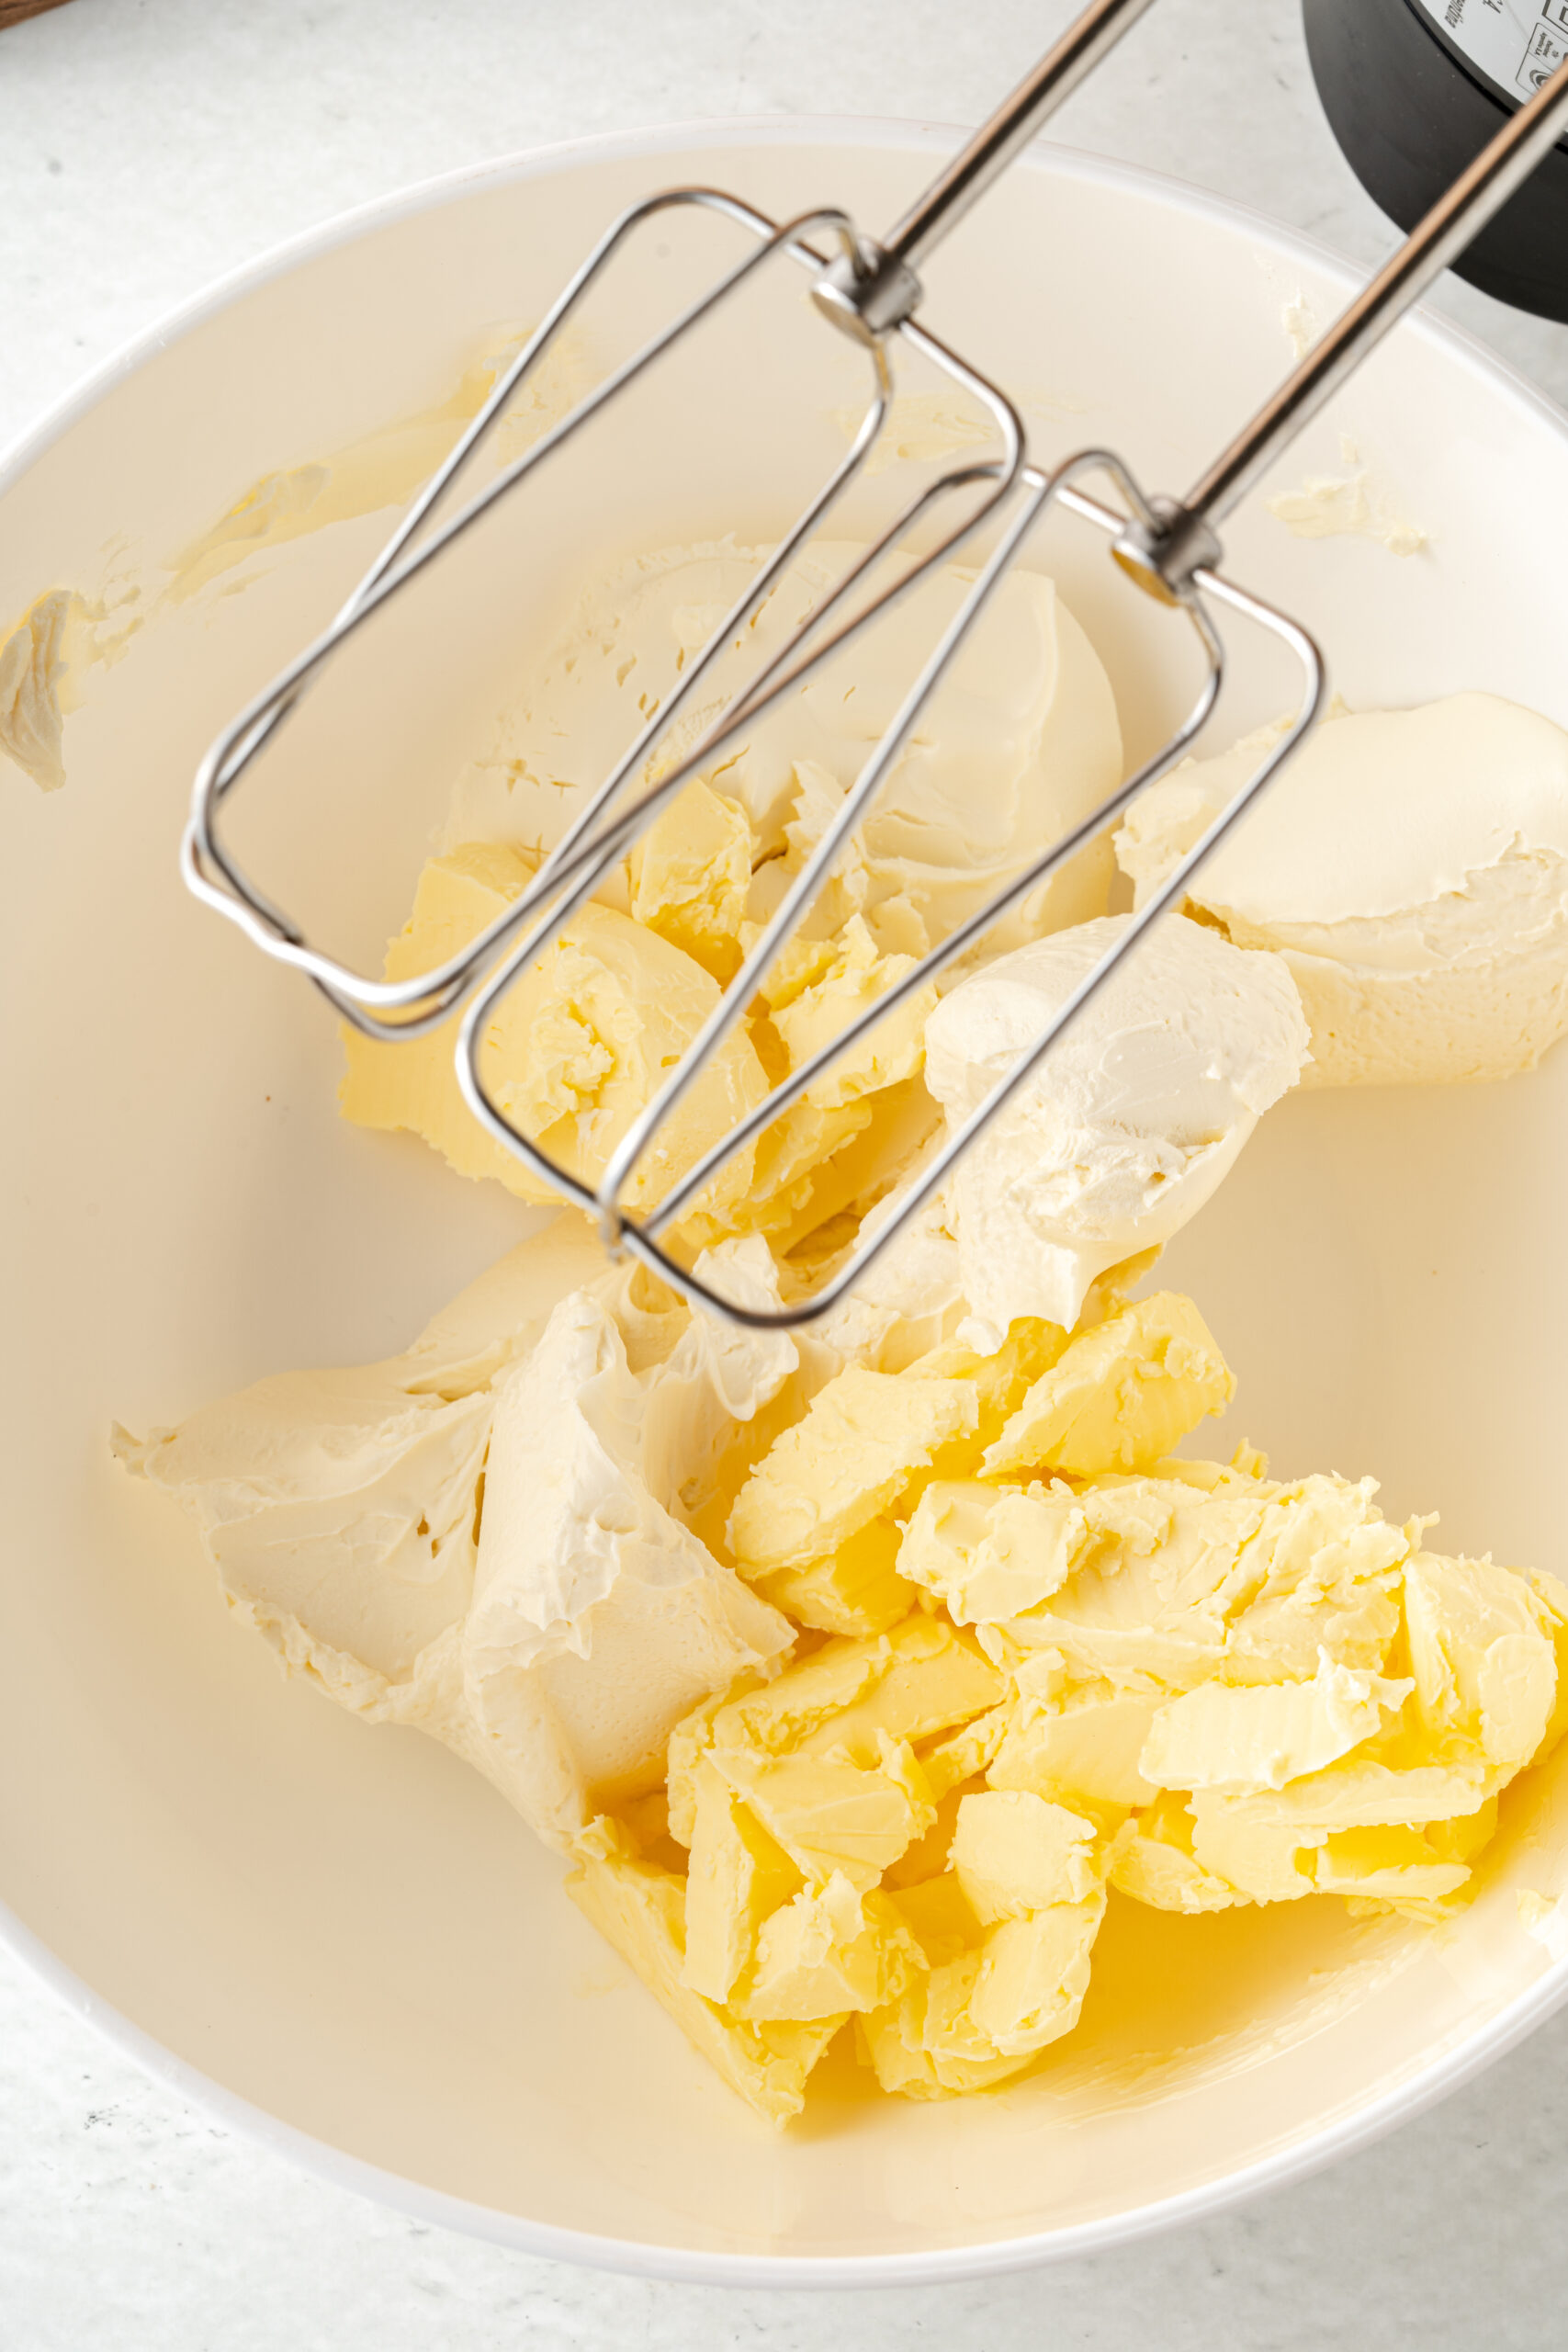 Butter in a mixing bowl with electric mixer in it.